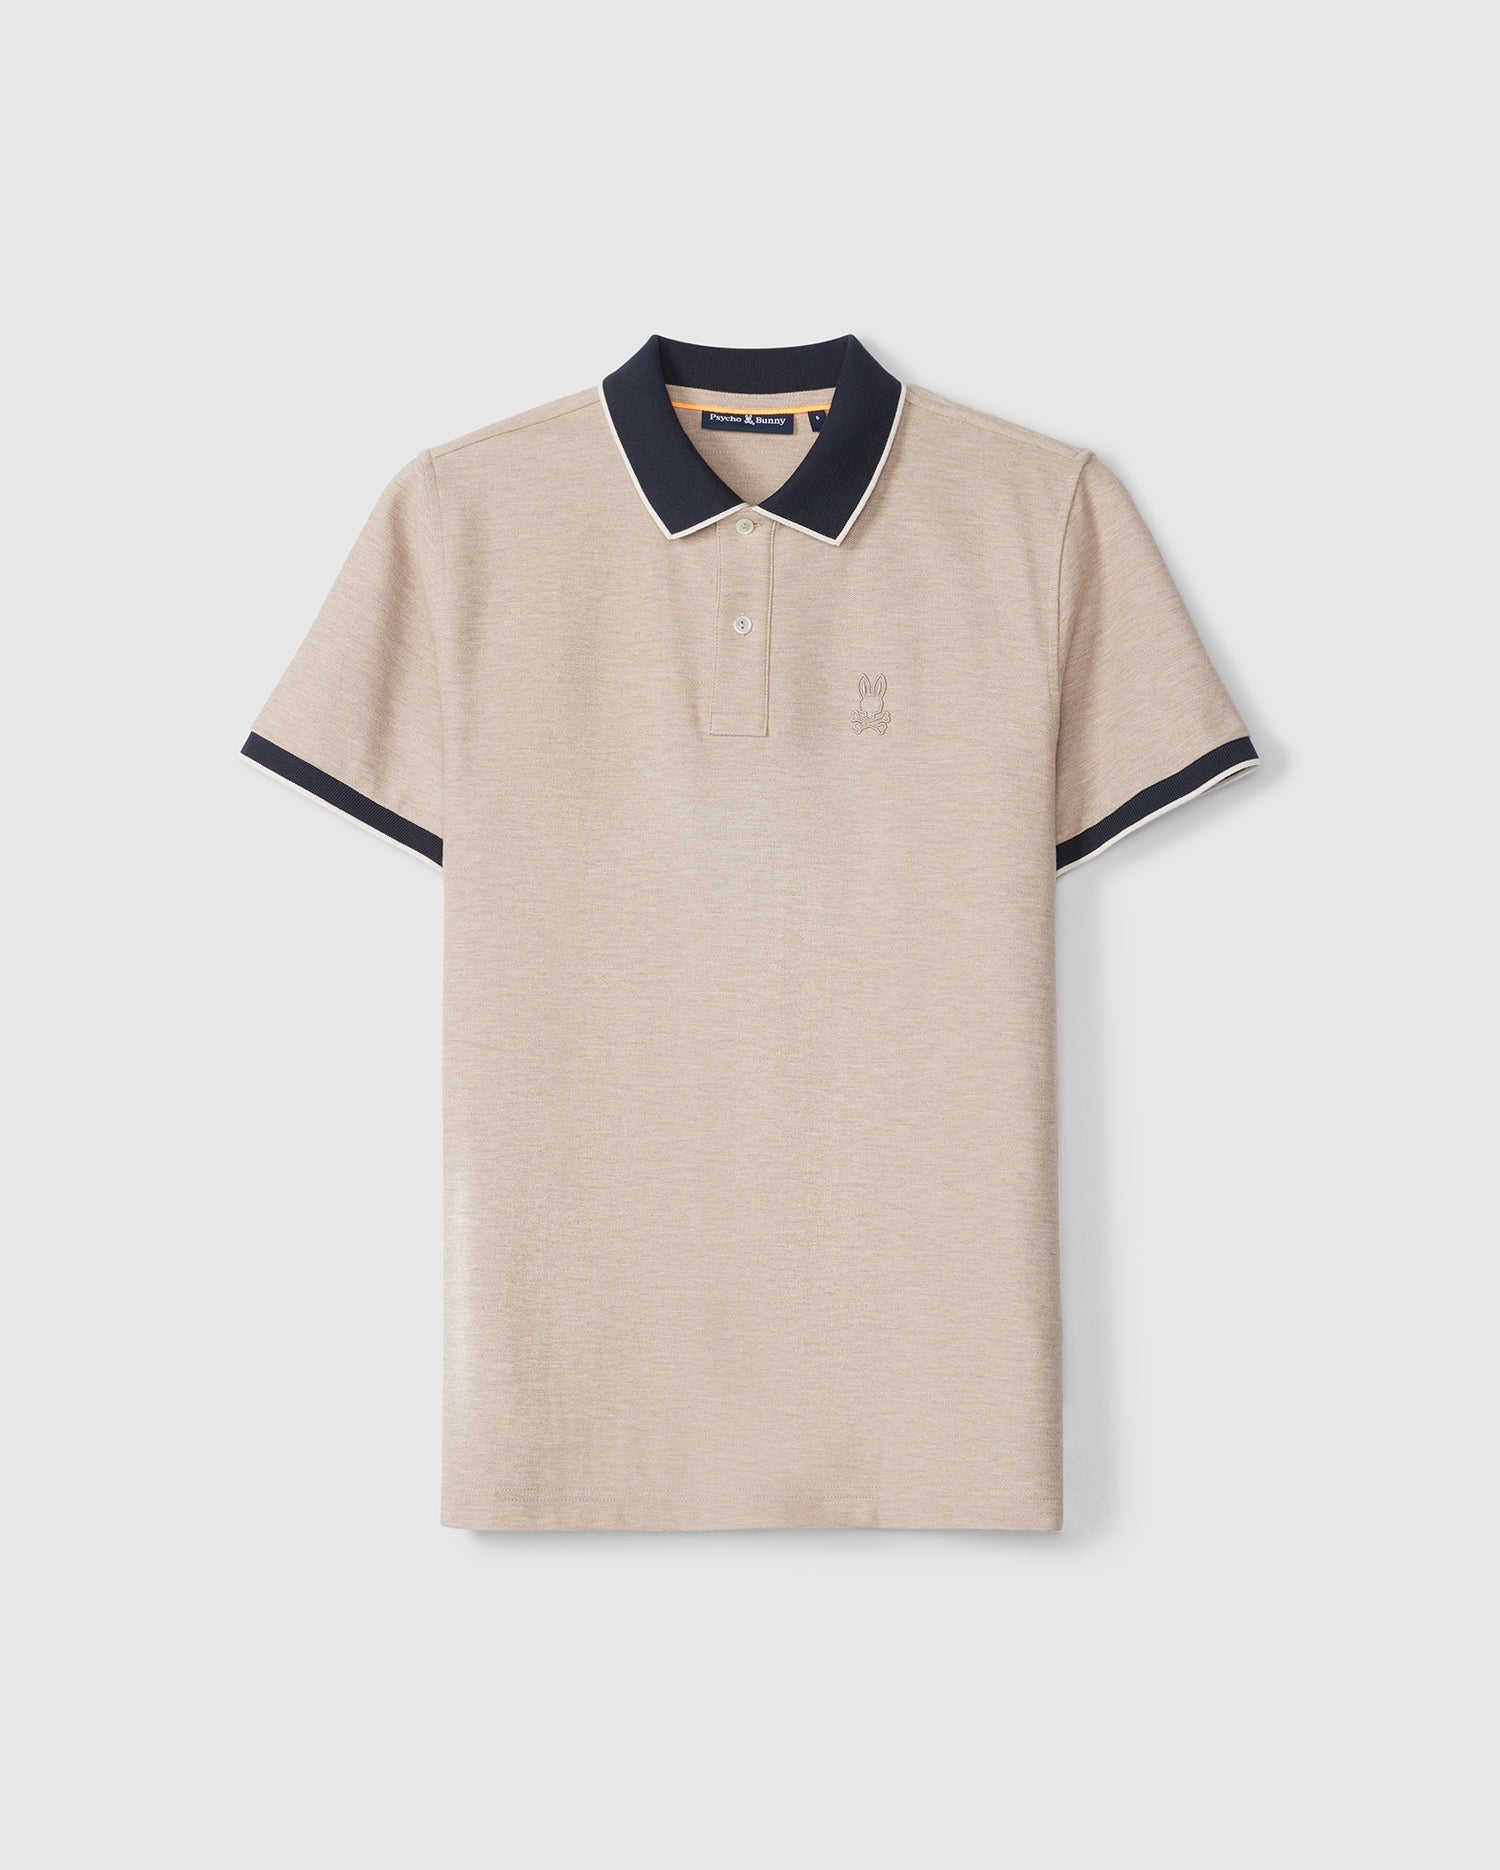 A beige Psycho Bunny pique polo shirt with navy blue trim on the collar and sleeves, displayed against a plain background. The shirt features a small embroidered logo on the left chest.